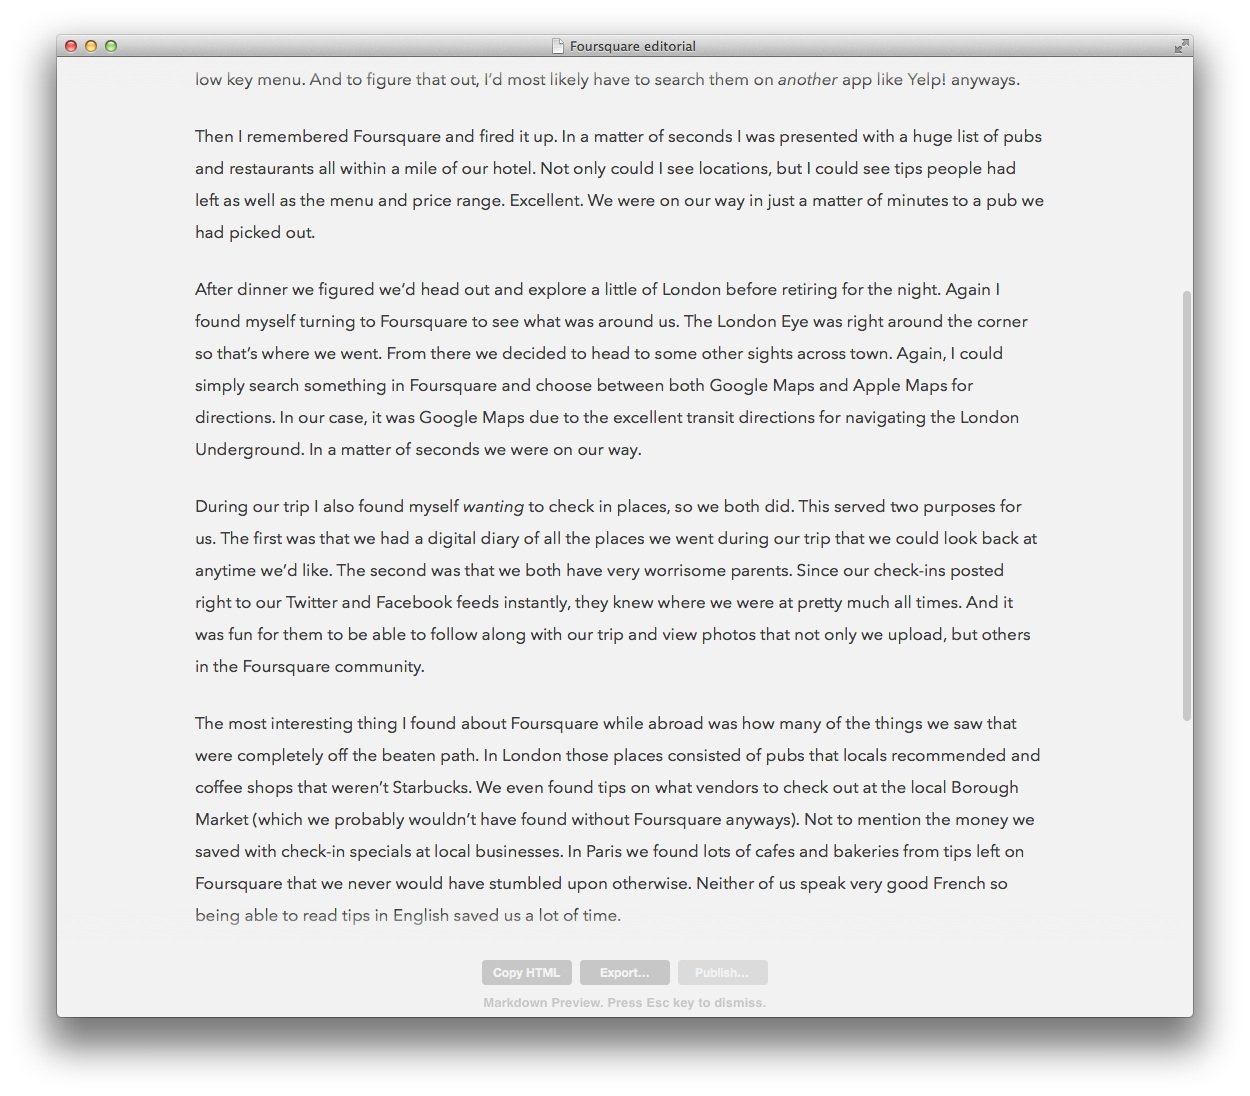 Best note taking apps for Mac: Byword